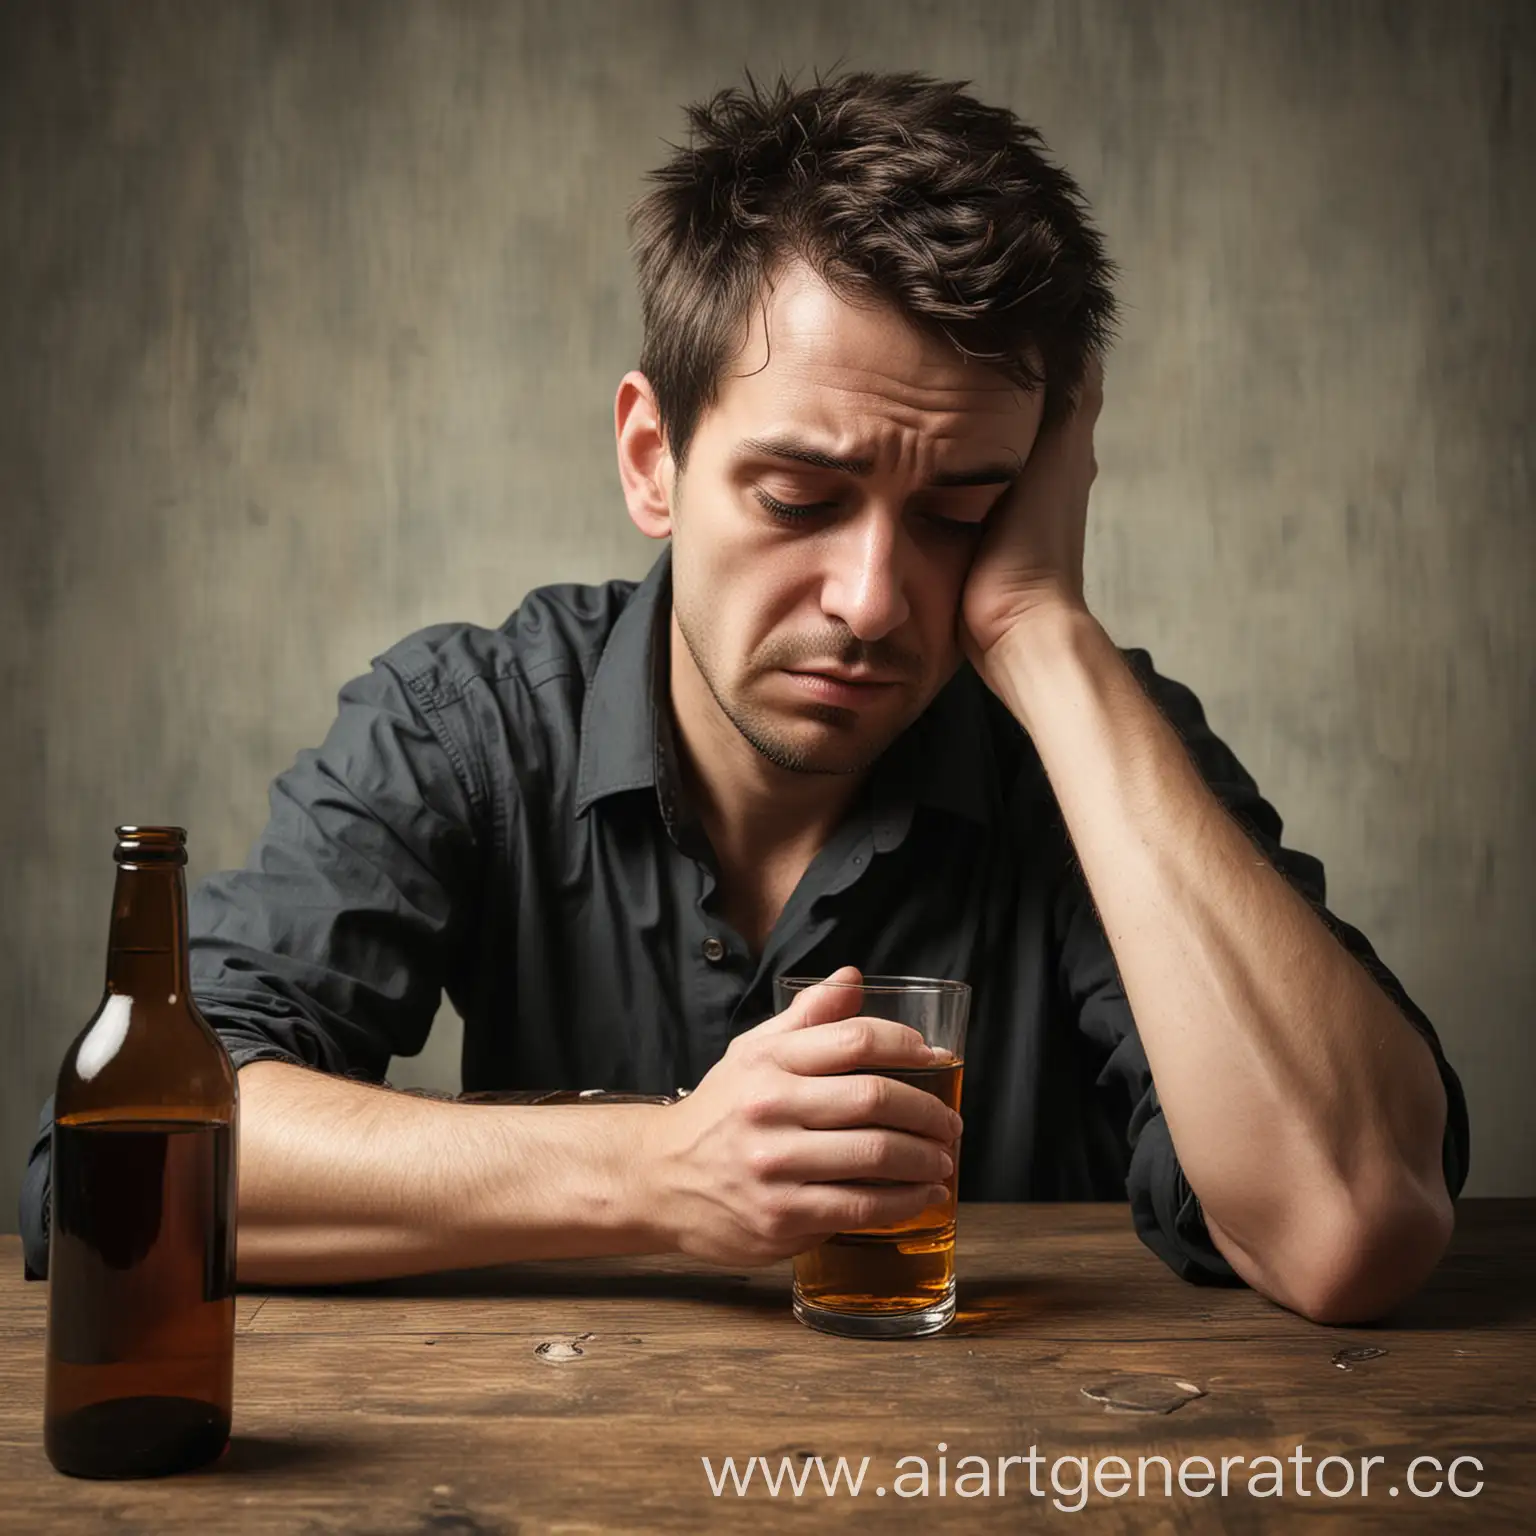 Struggling-with-Alcoholism-Portrait-of-an-Unfortunate-Person